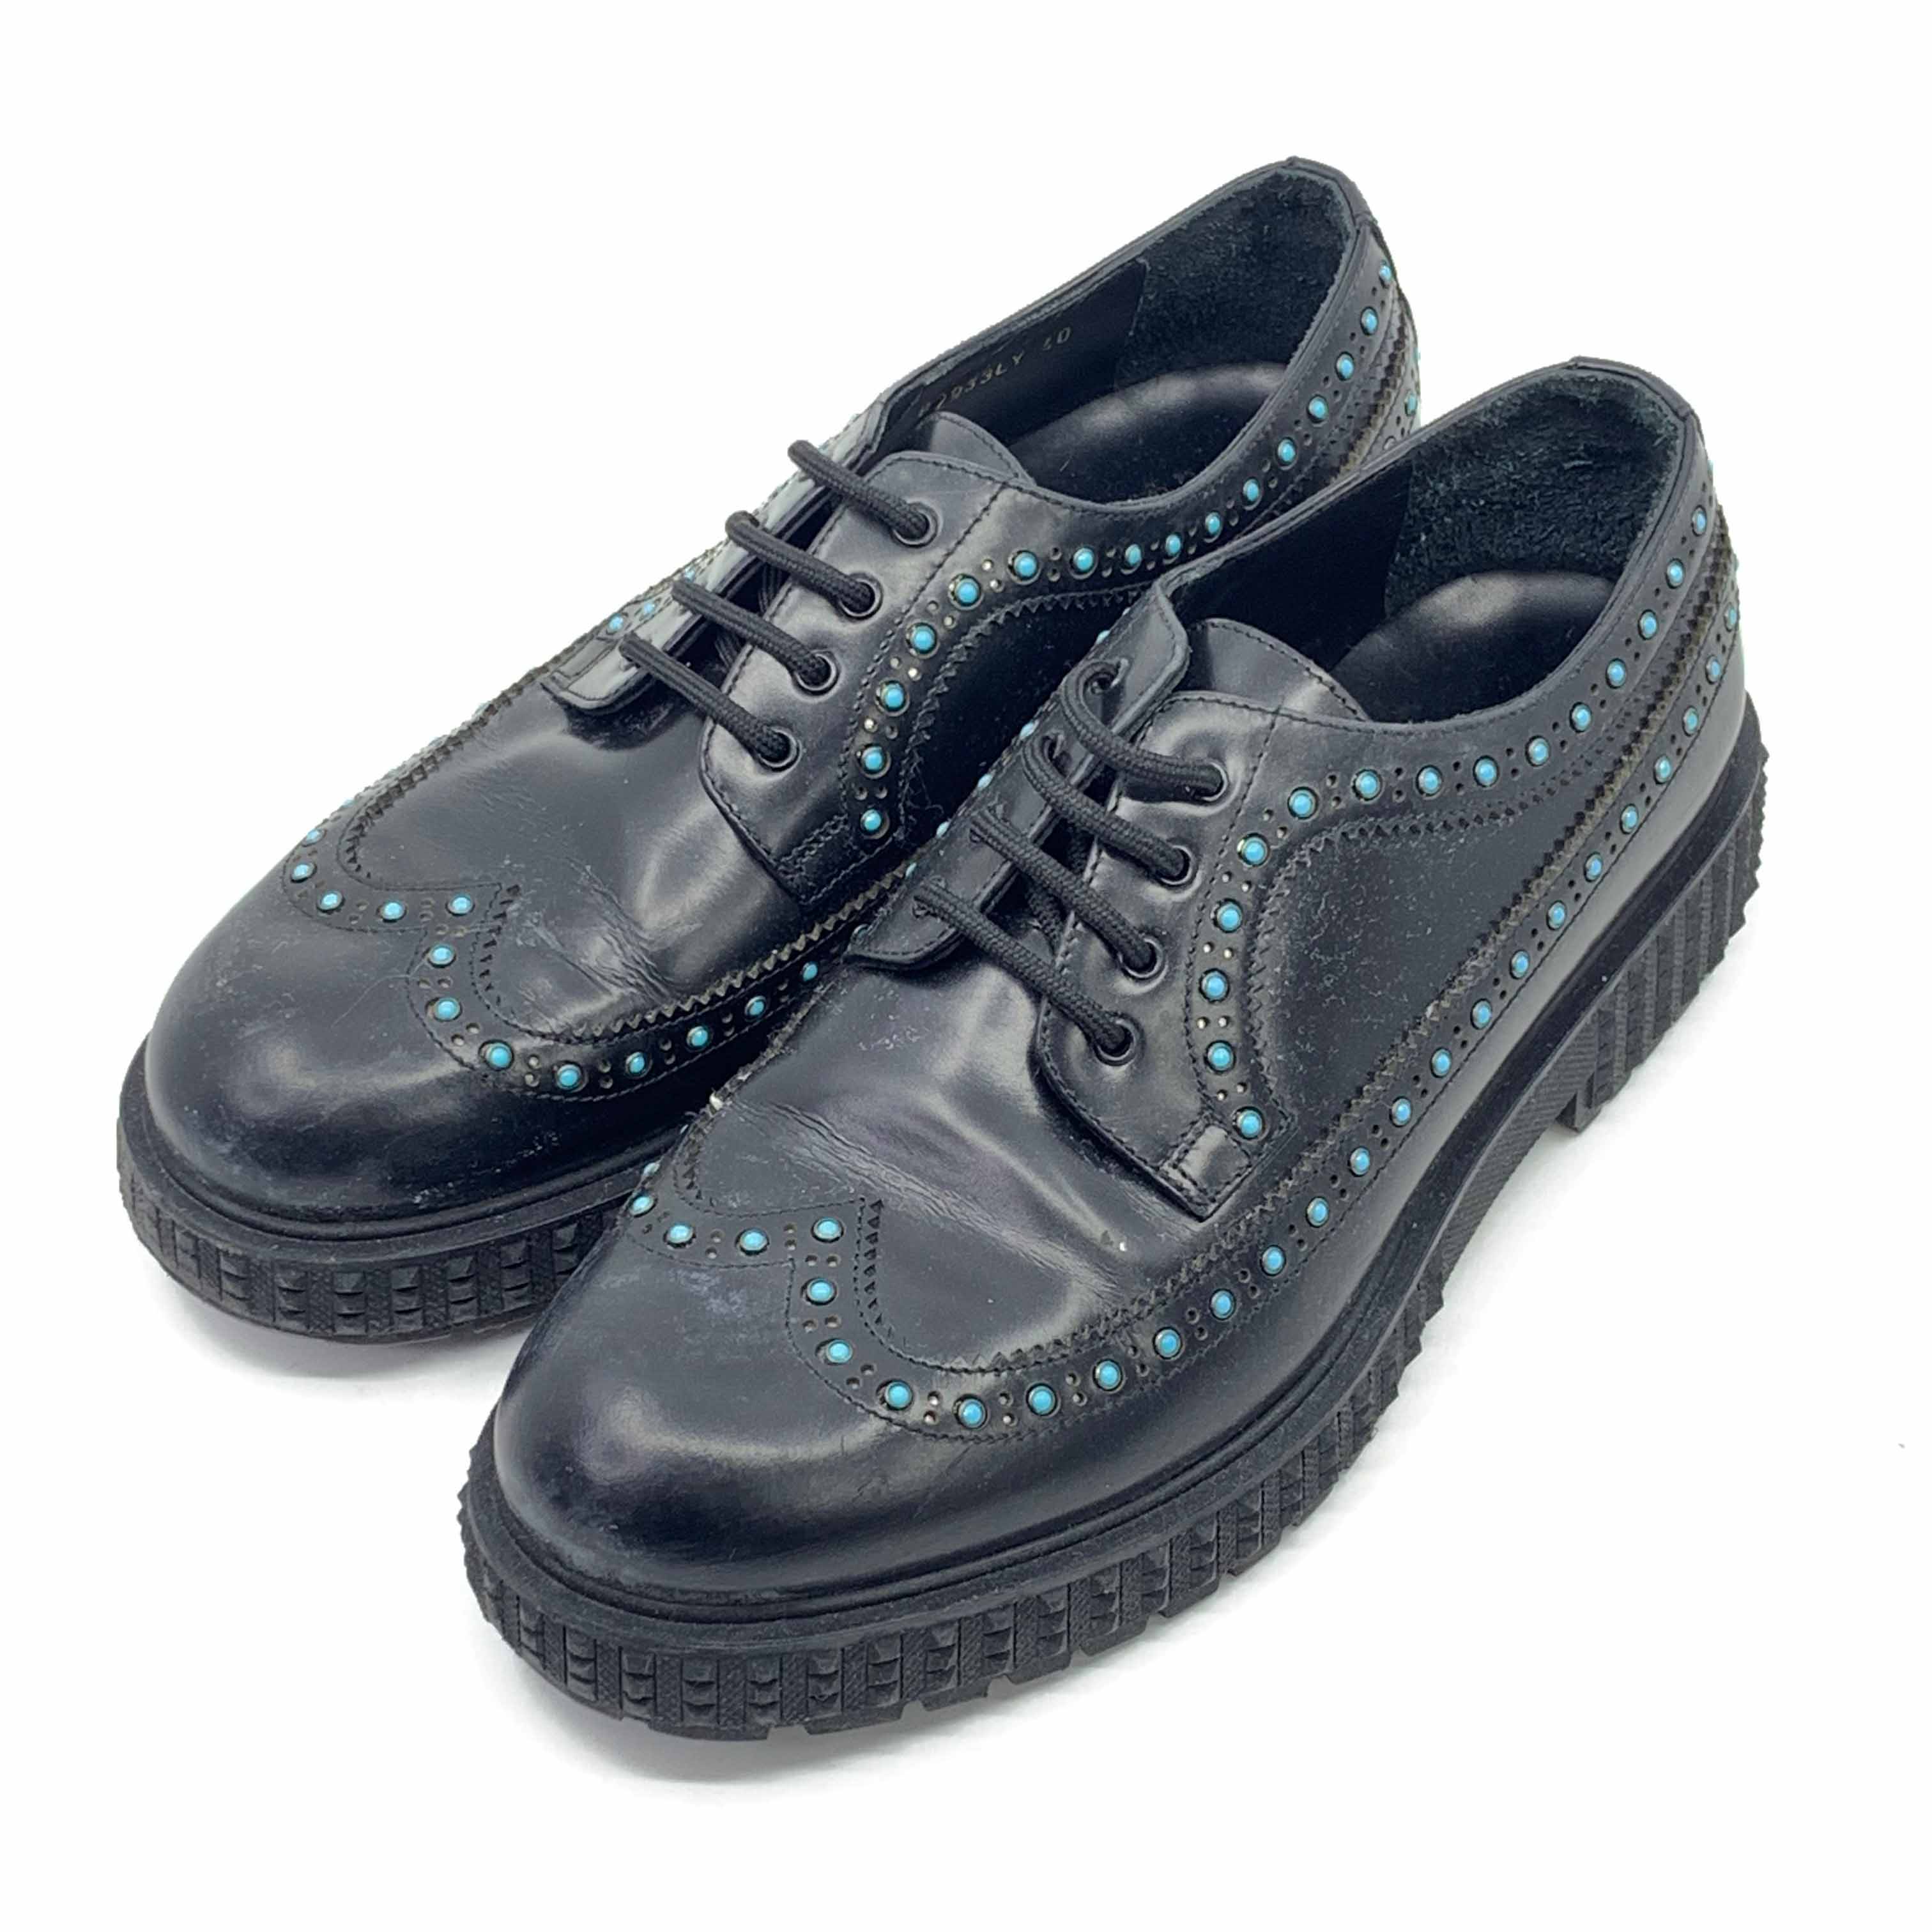 [Valentino] Blue Studded Wingtip Clippers BK - EUR40